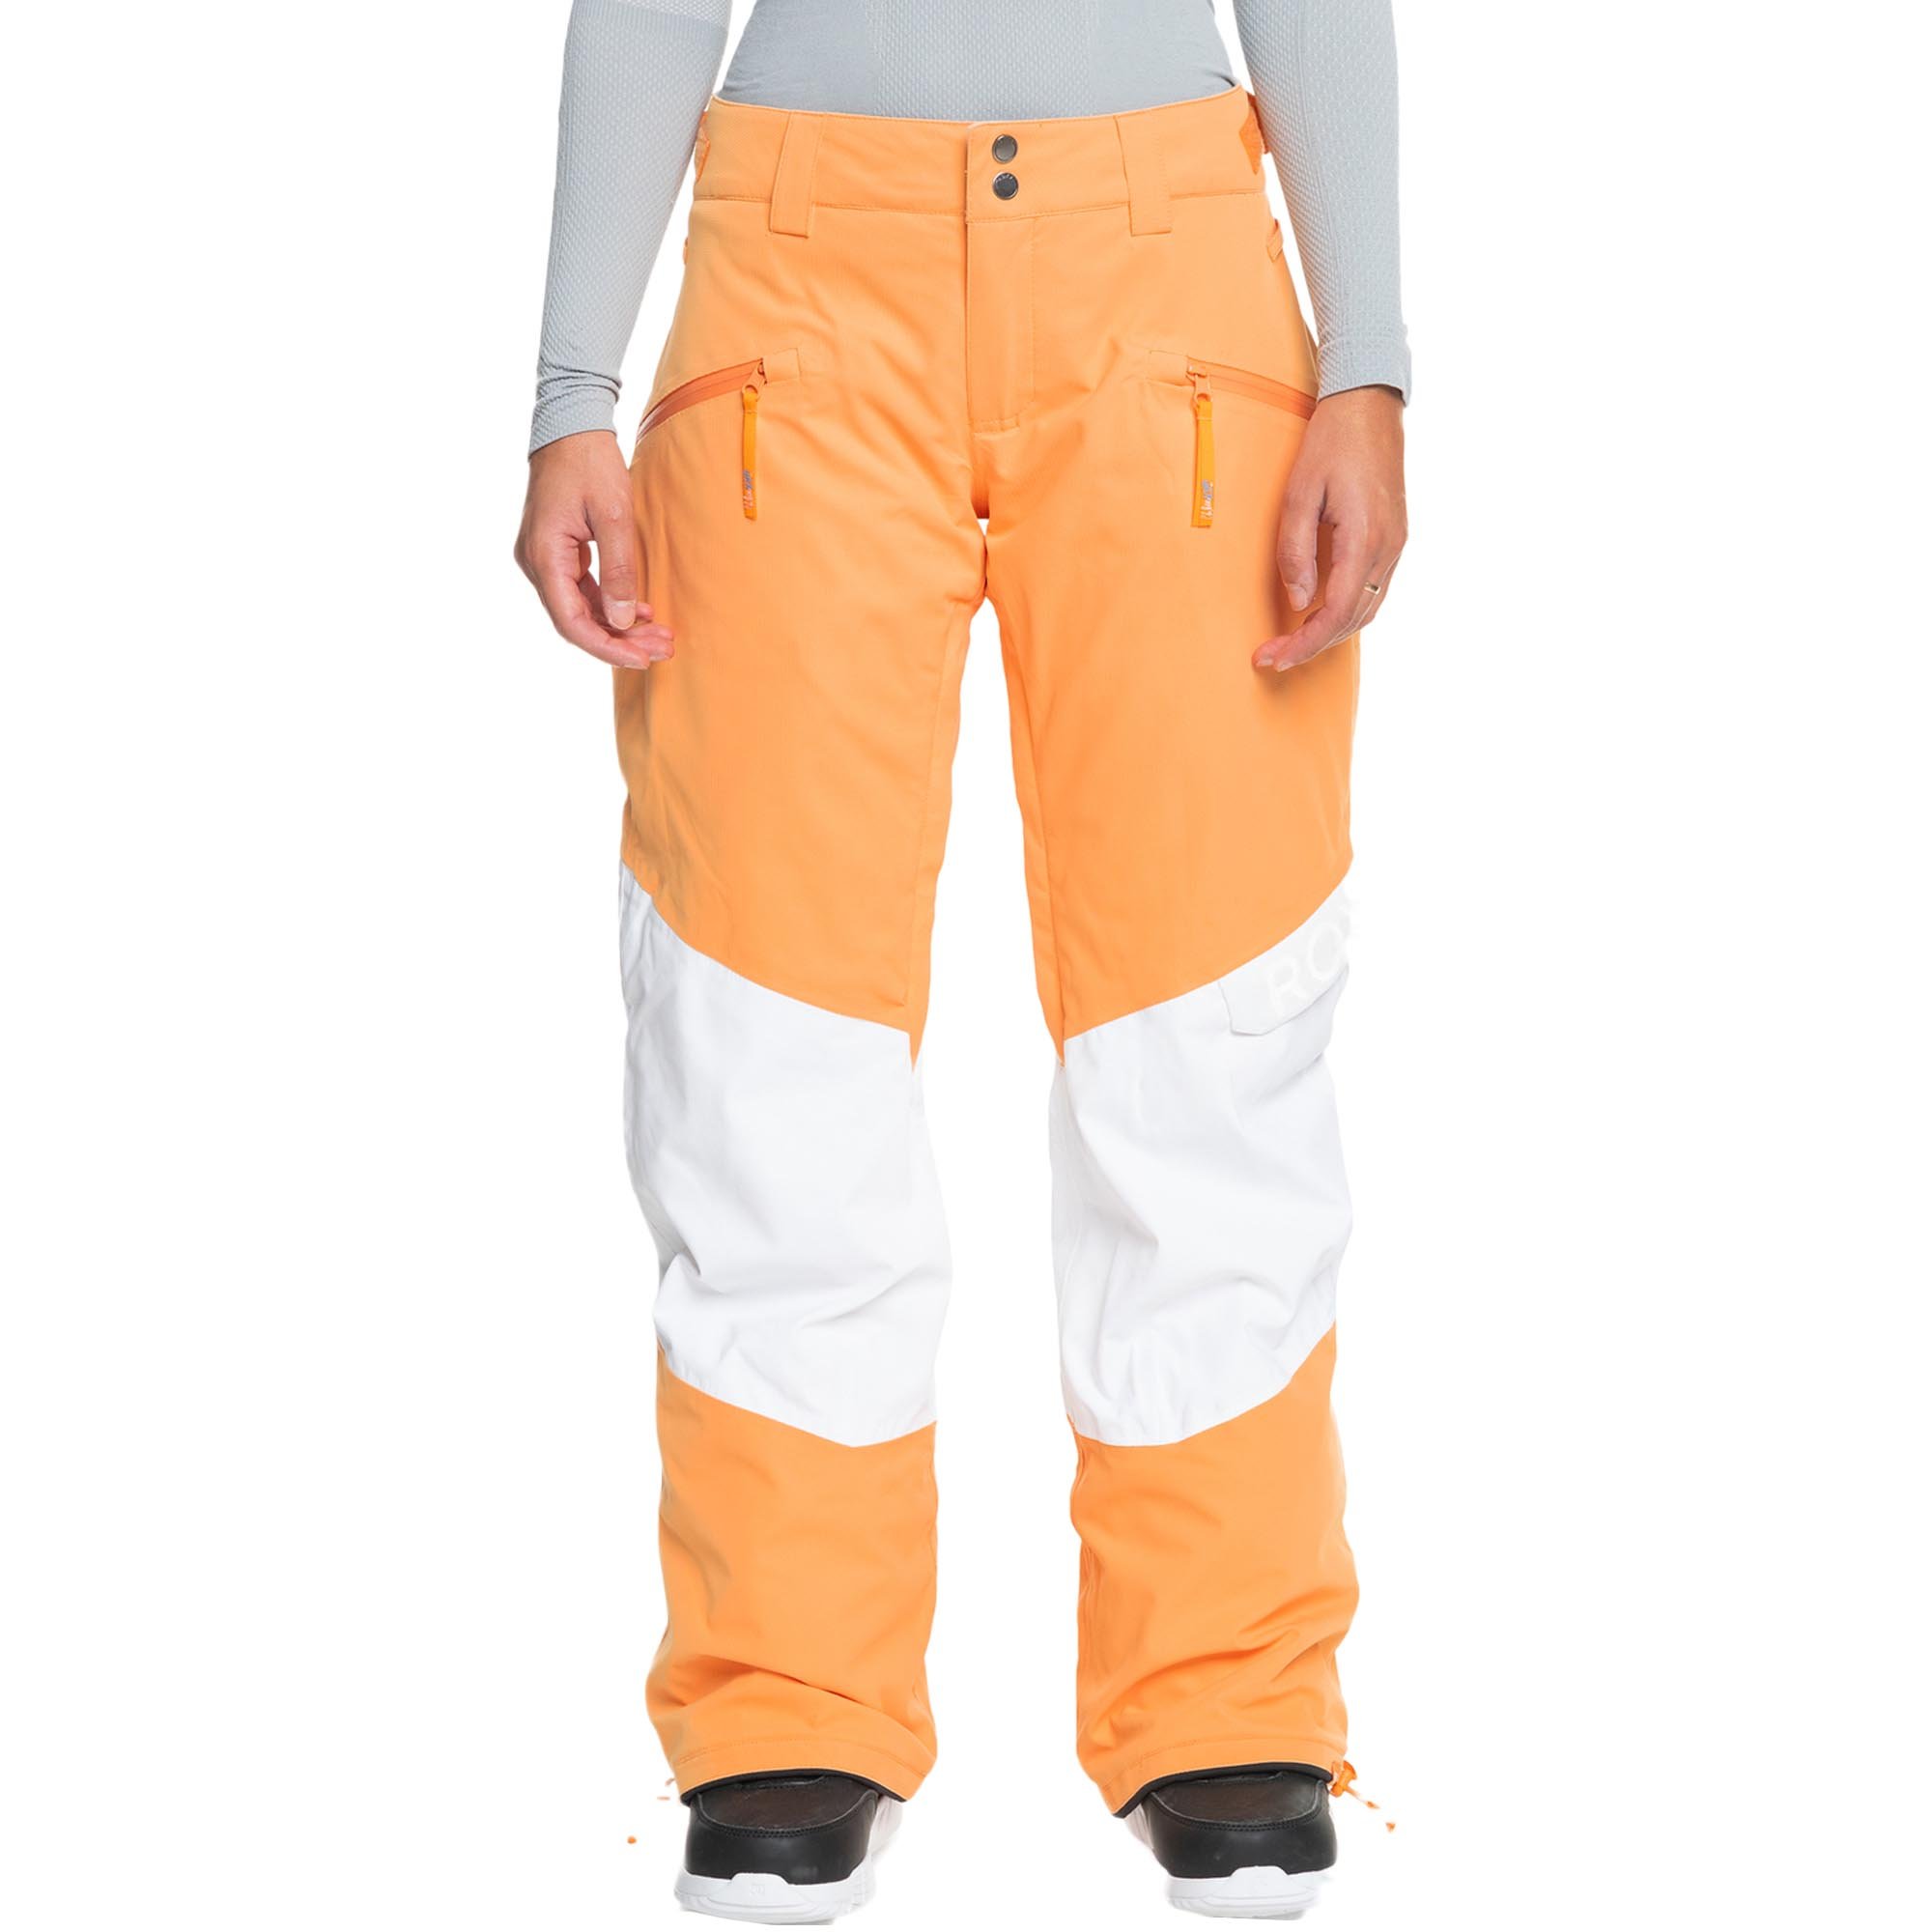 ROXY Women's Nadia Insulated Snow Pants - Great Outdoor Shop